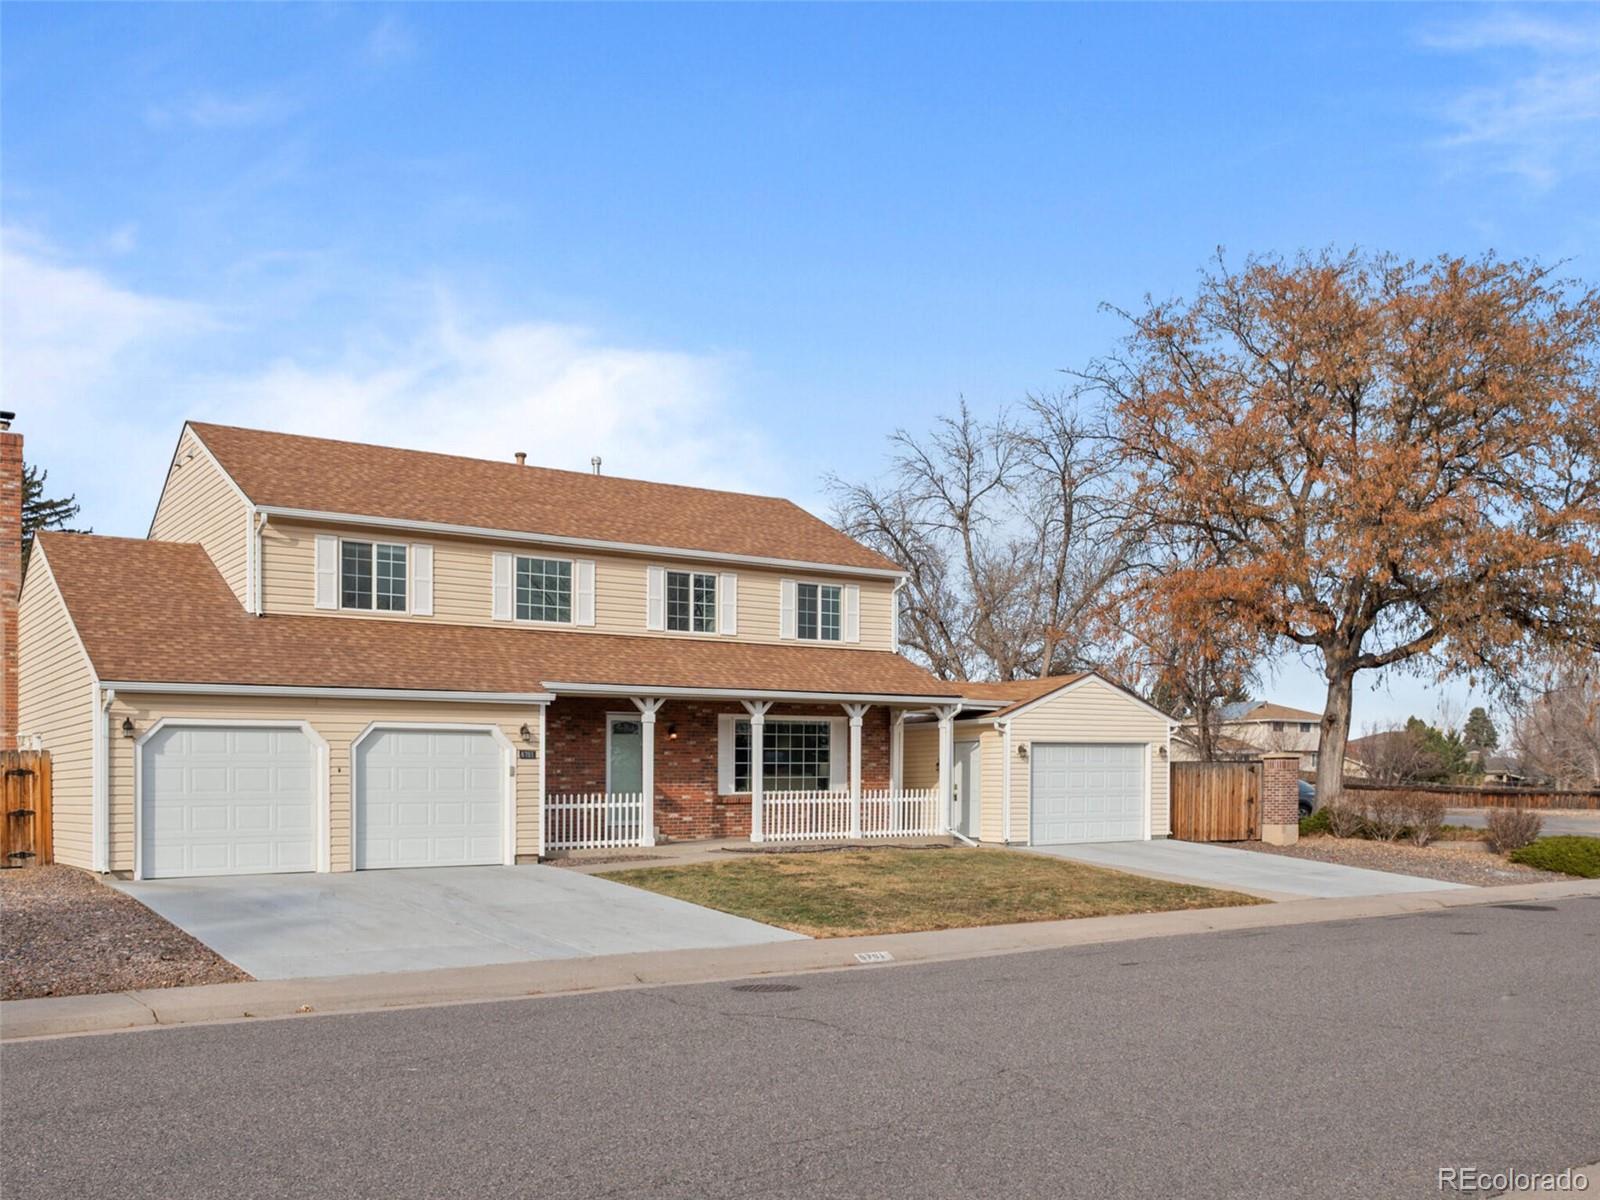 6701 s dahlia court, centennial sold home. Closed on 2024-01-19 for $725,000.